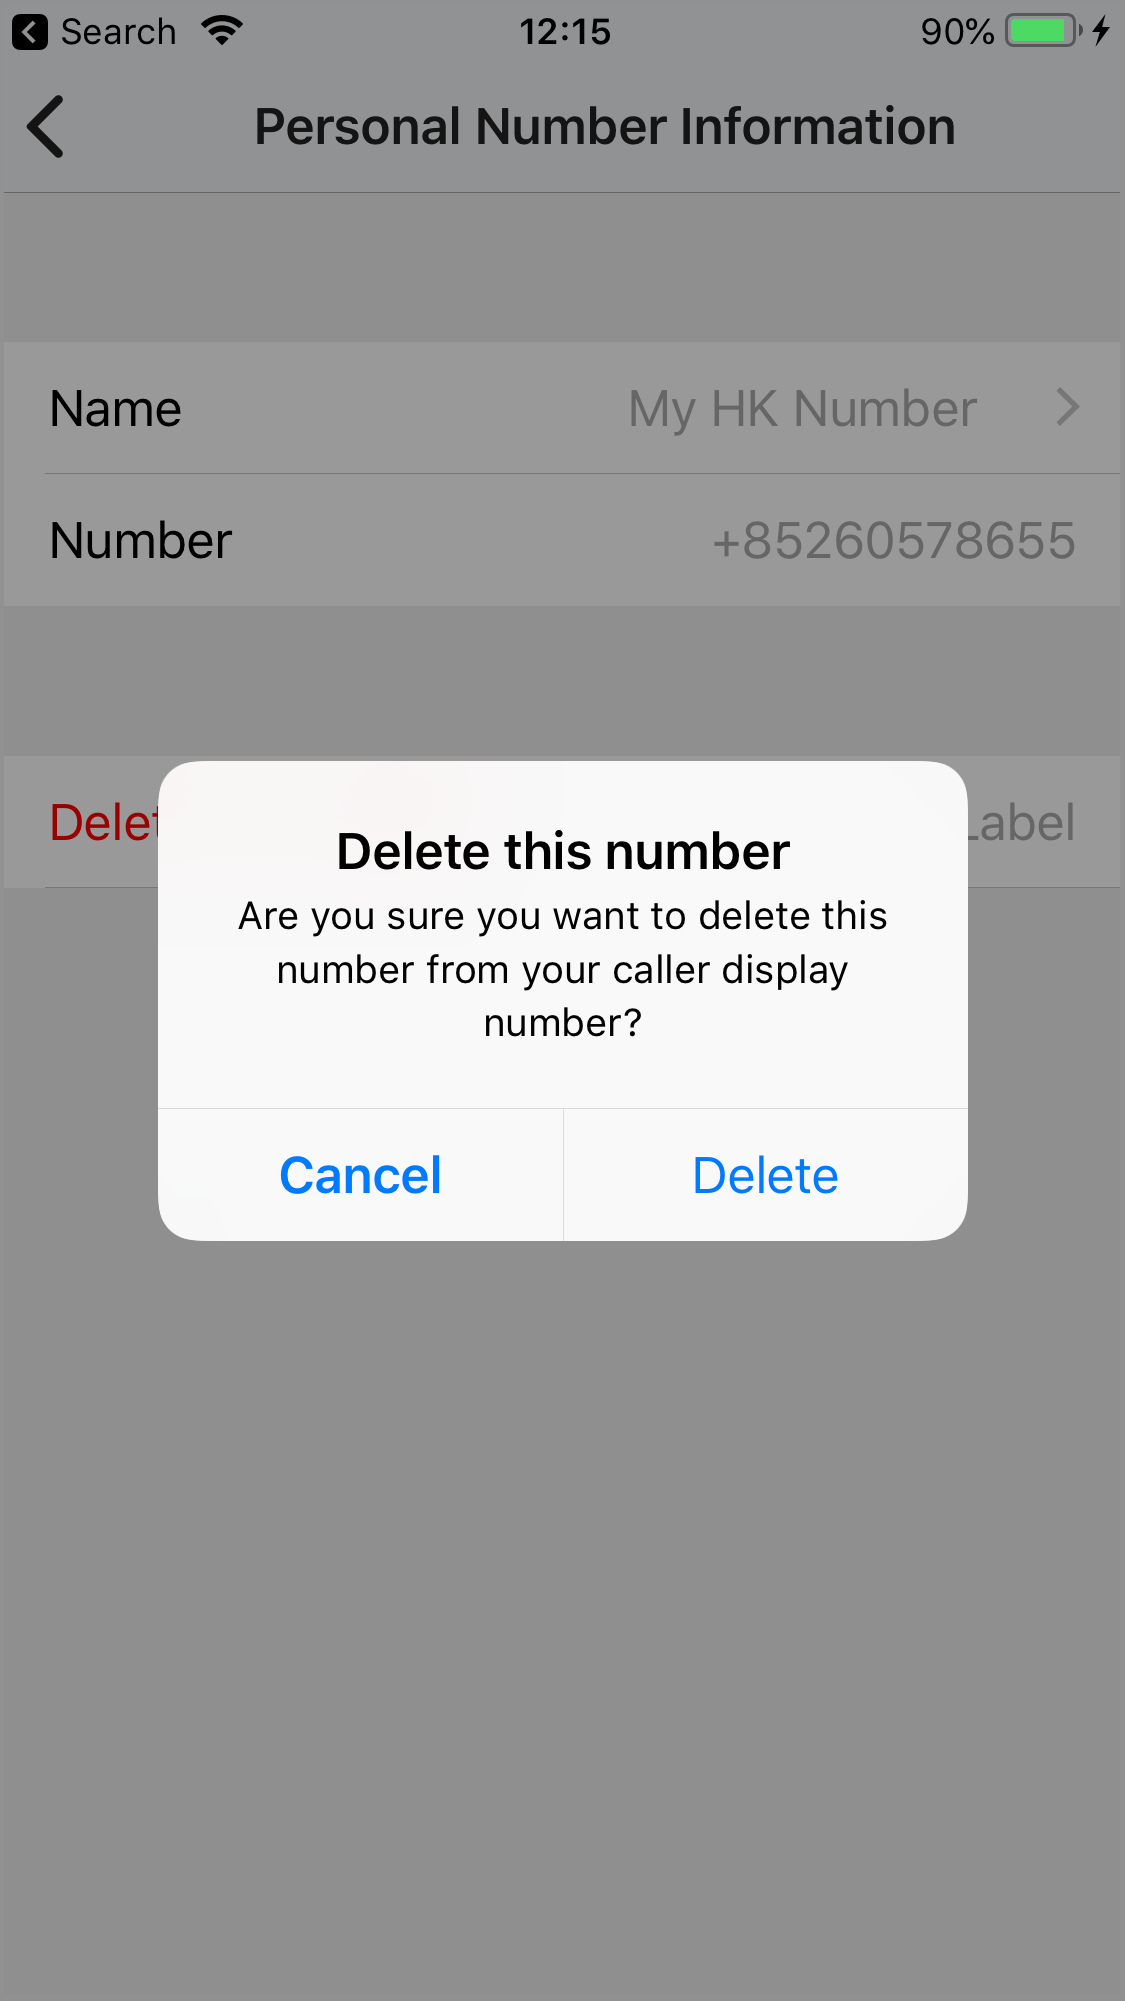 Delete Personal Number Confirmation